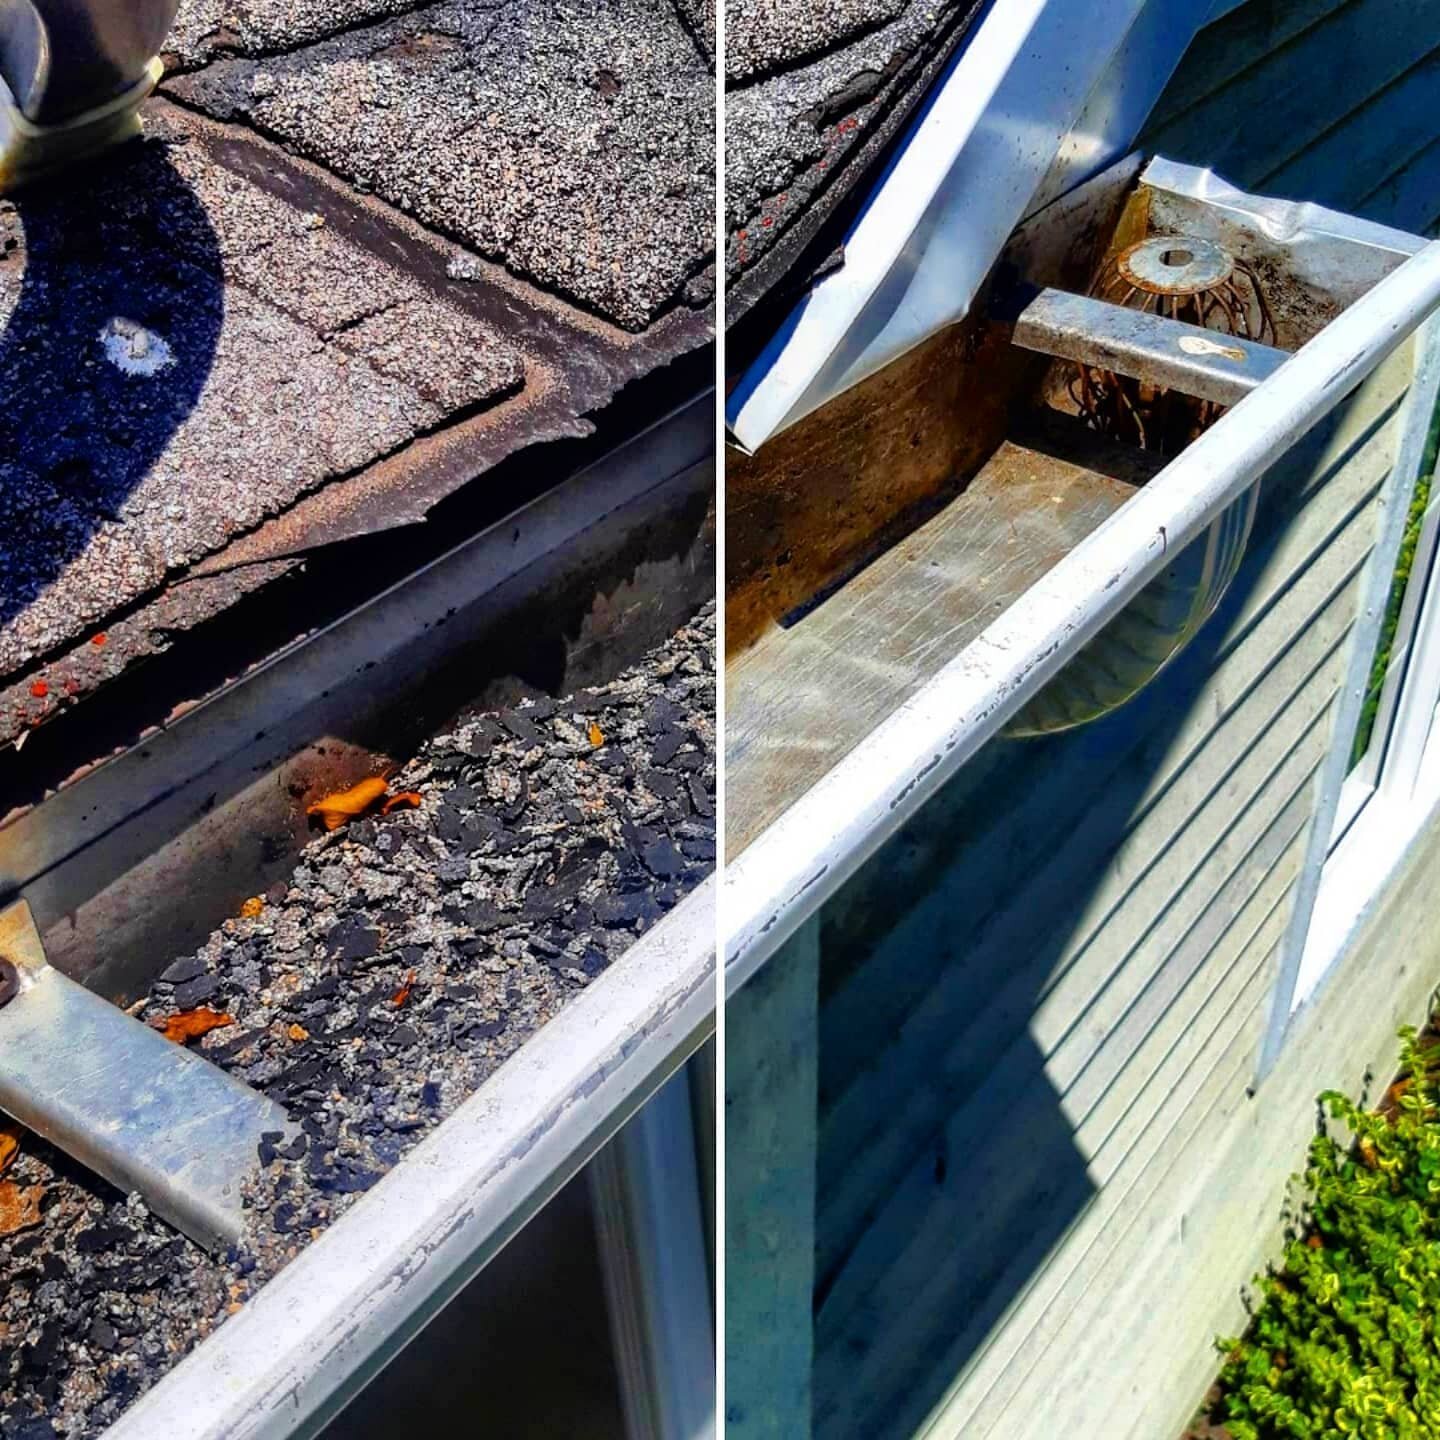 IN NEED OF A NEW ROOF?  BETTER CHECK YOUR GUTTERS.

If your home is in desperate need of a new roof, you're likely also in need of an eavestrough cleaning.  As aphalt shingles degrade they shed granules that end up in your gutter system.  Too heavy t